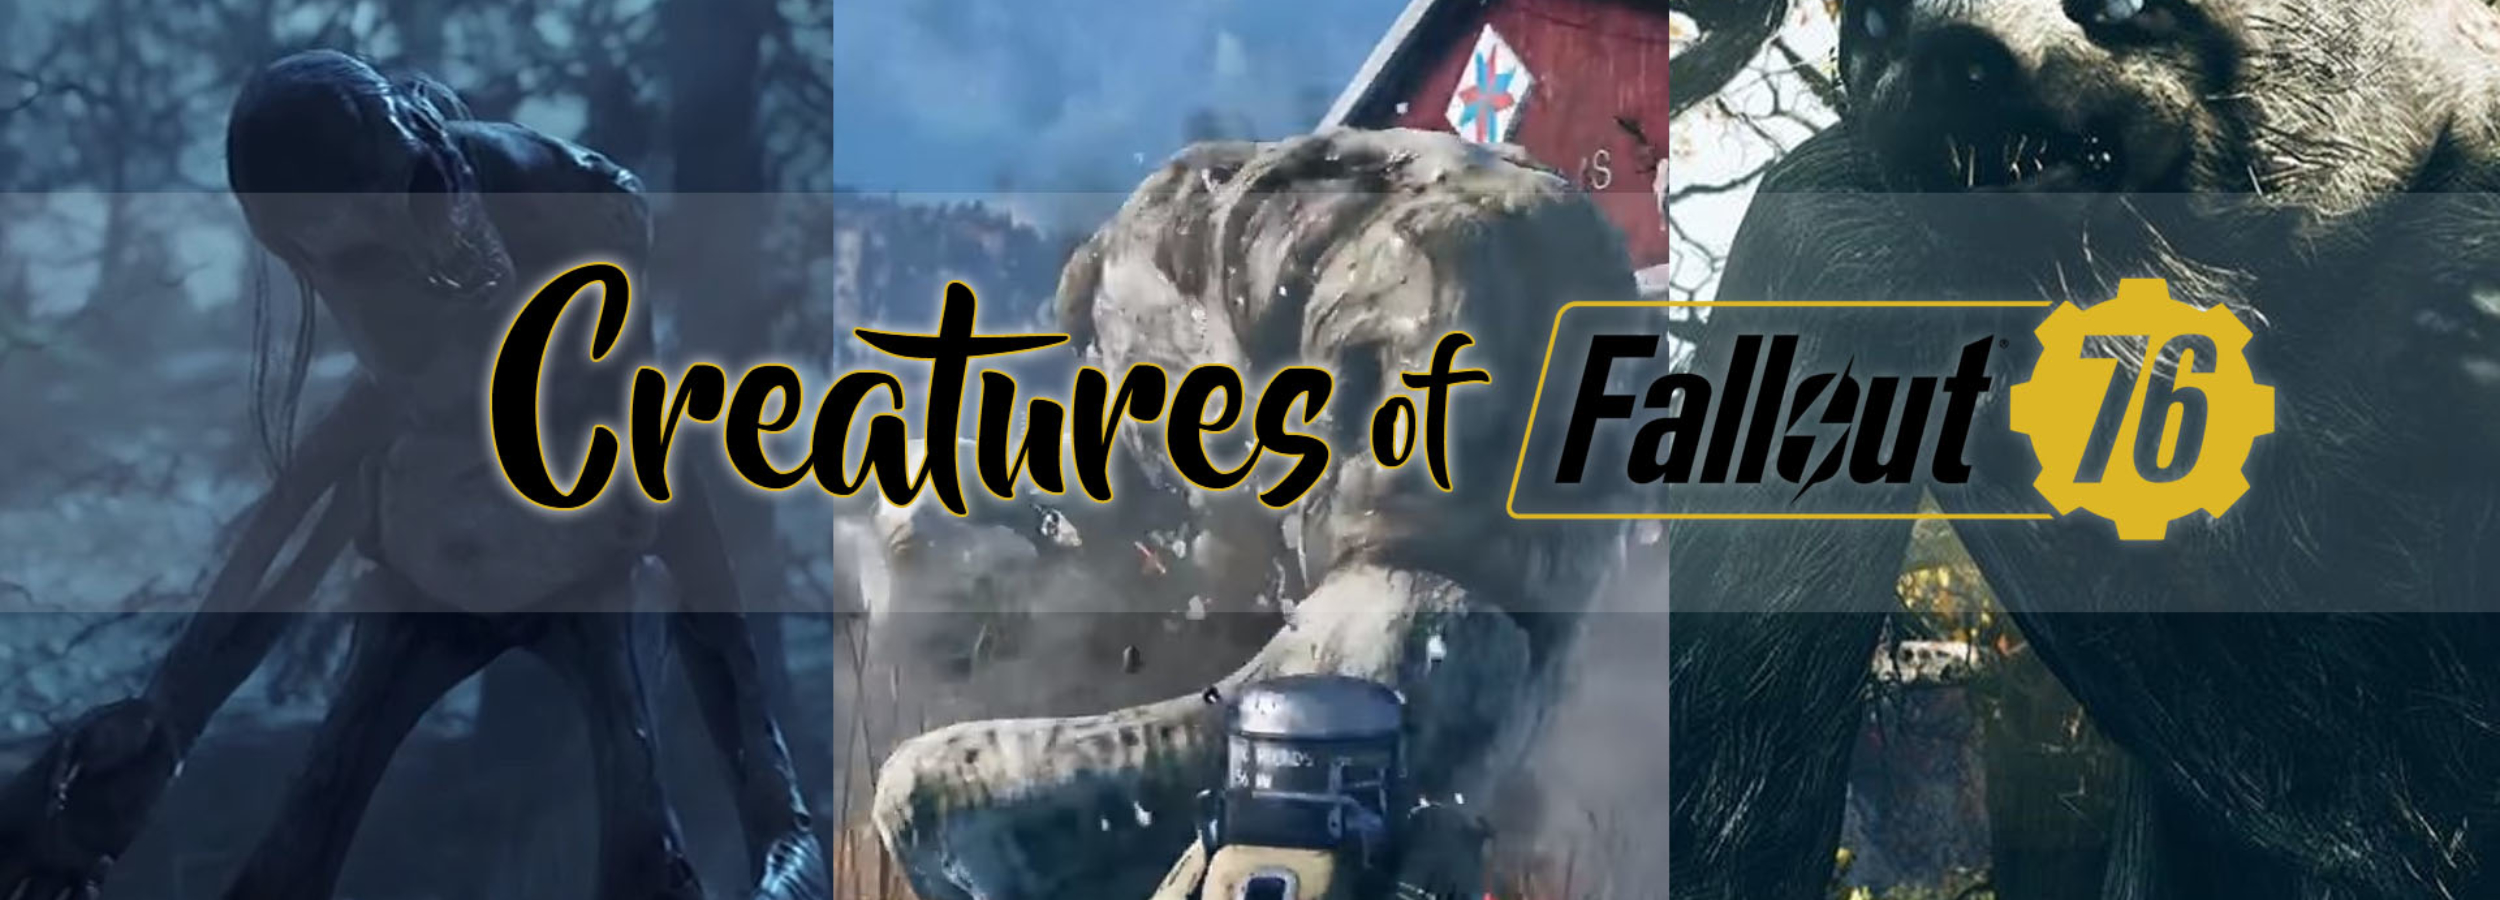 banner-fo76